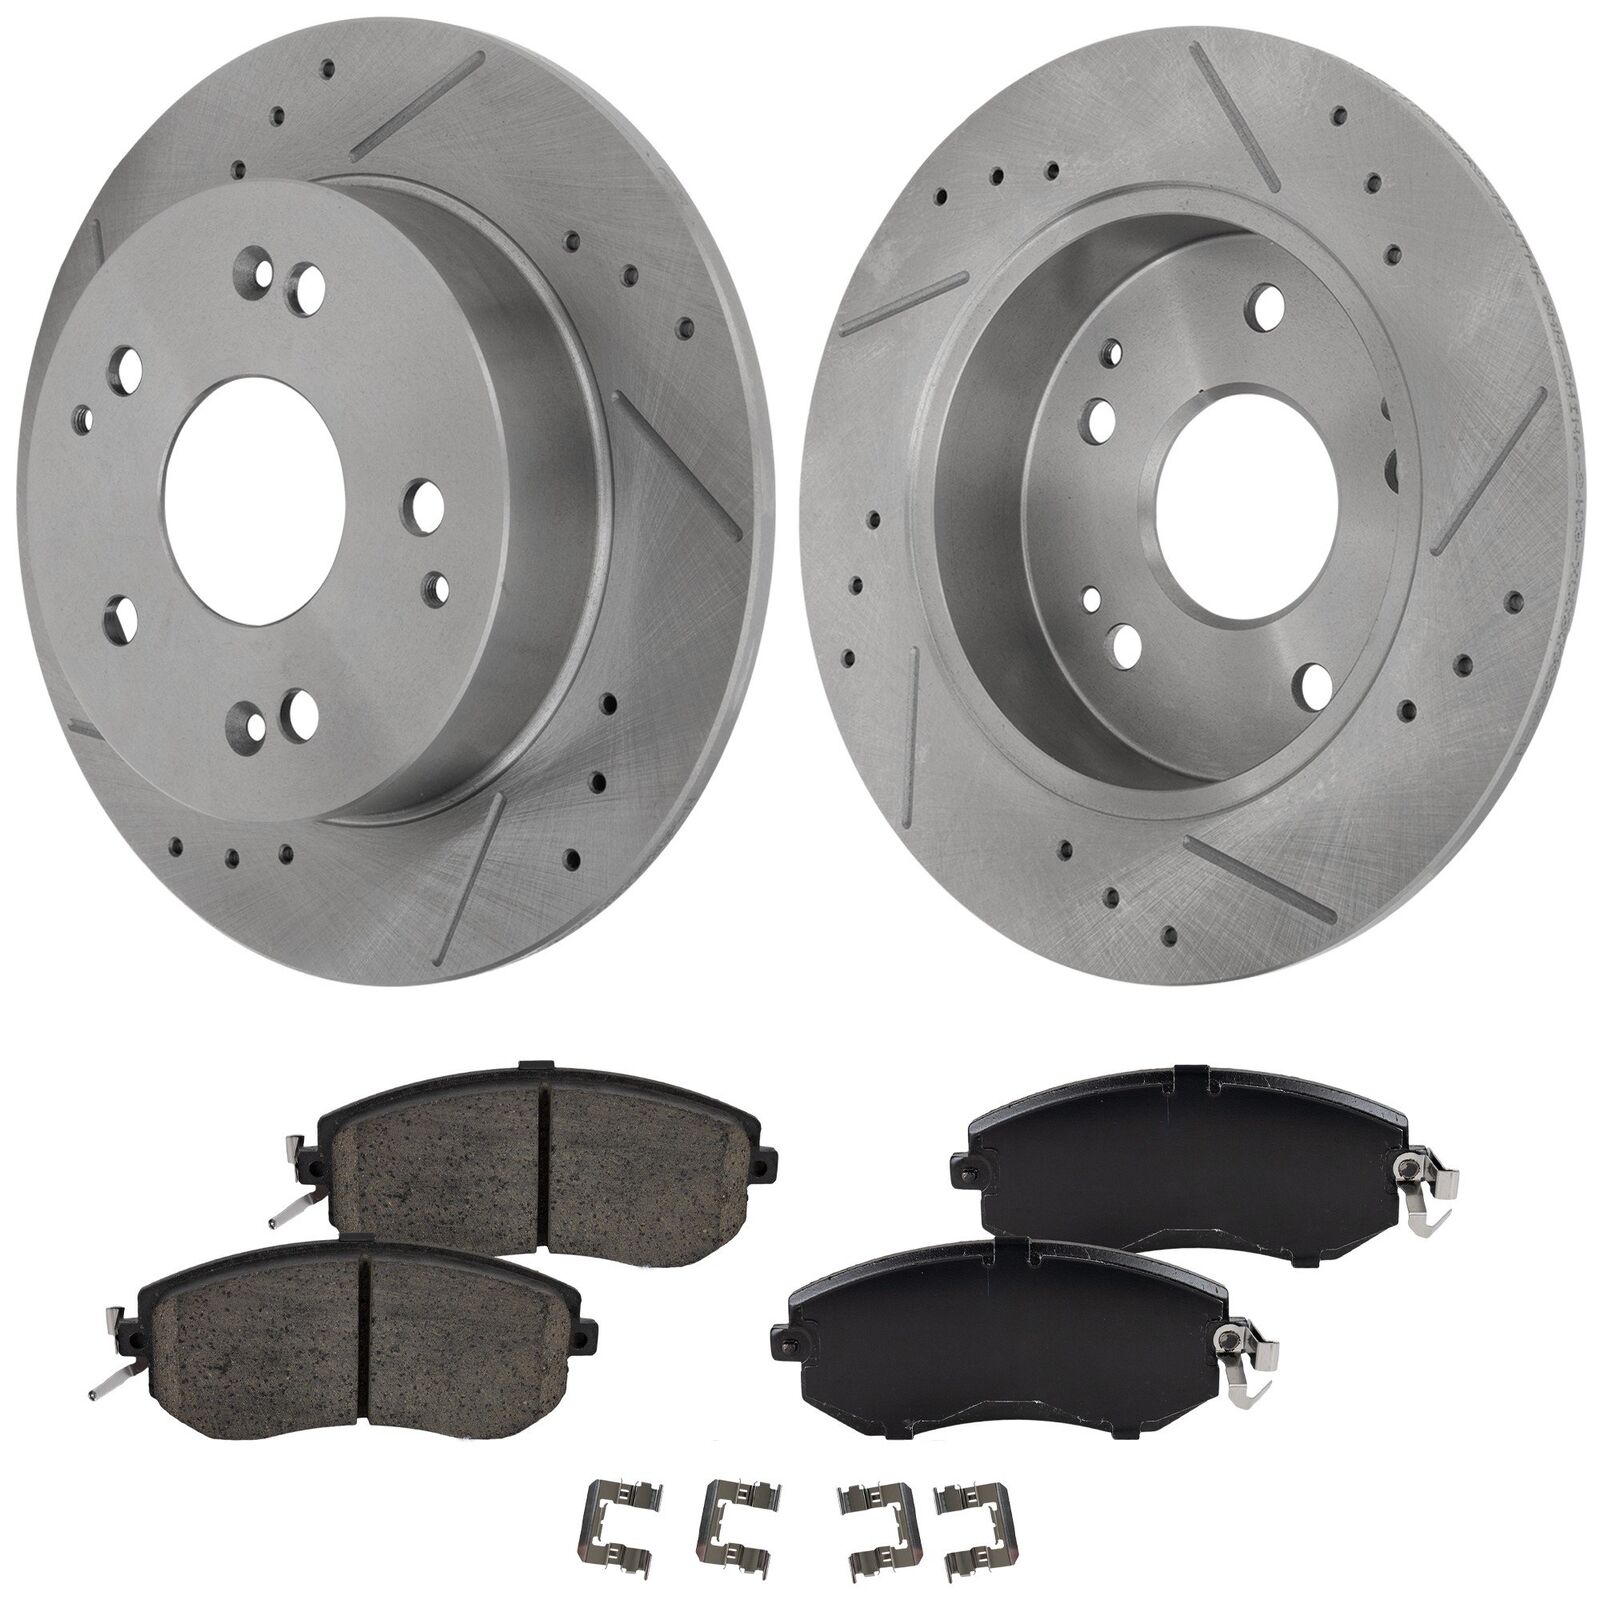 Front Brake Disc and Pad Kit for 2013-2016 FR-S, 2-Wheel Set, Cross-drilled and